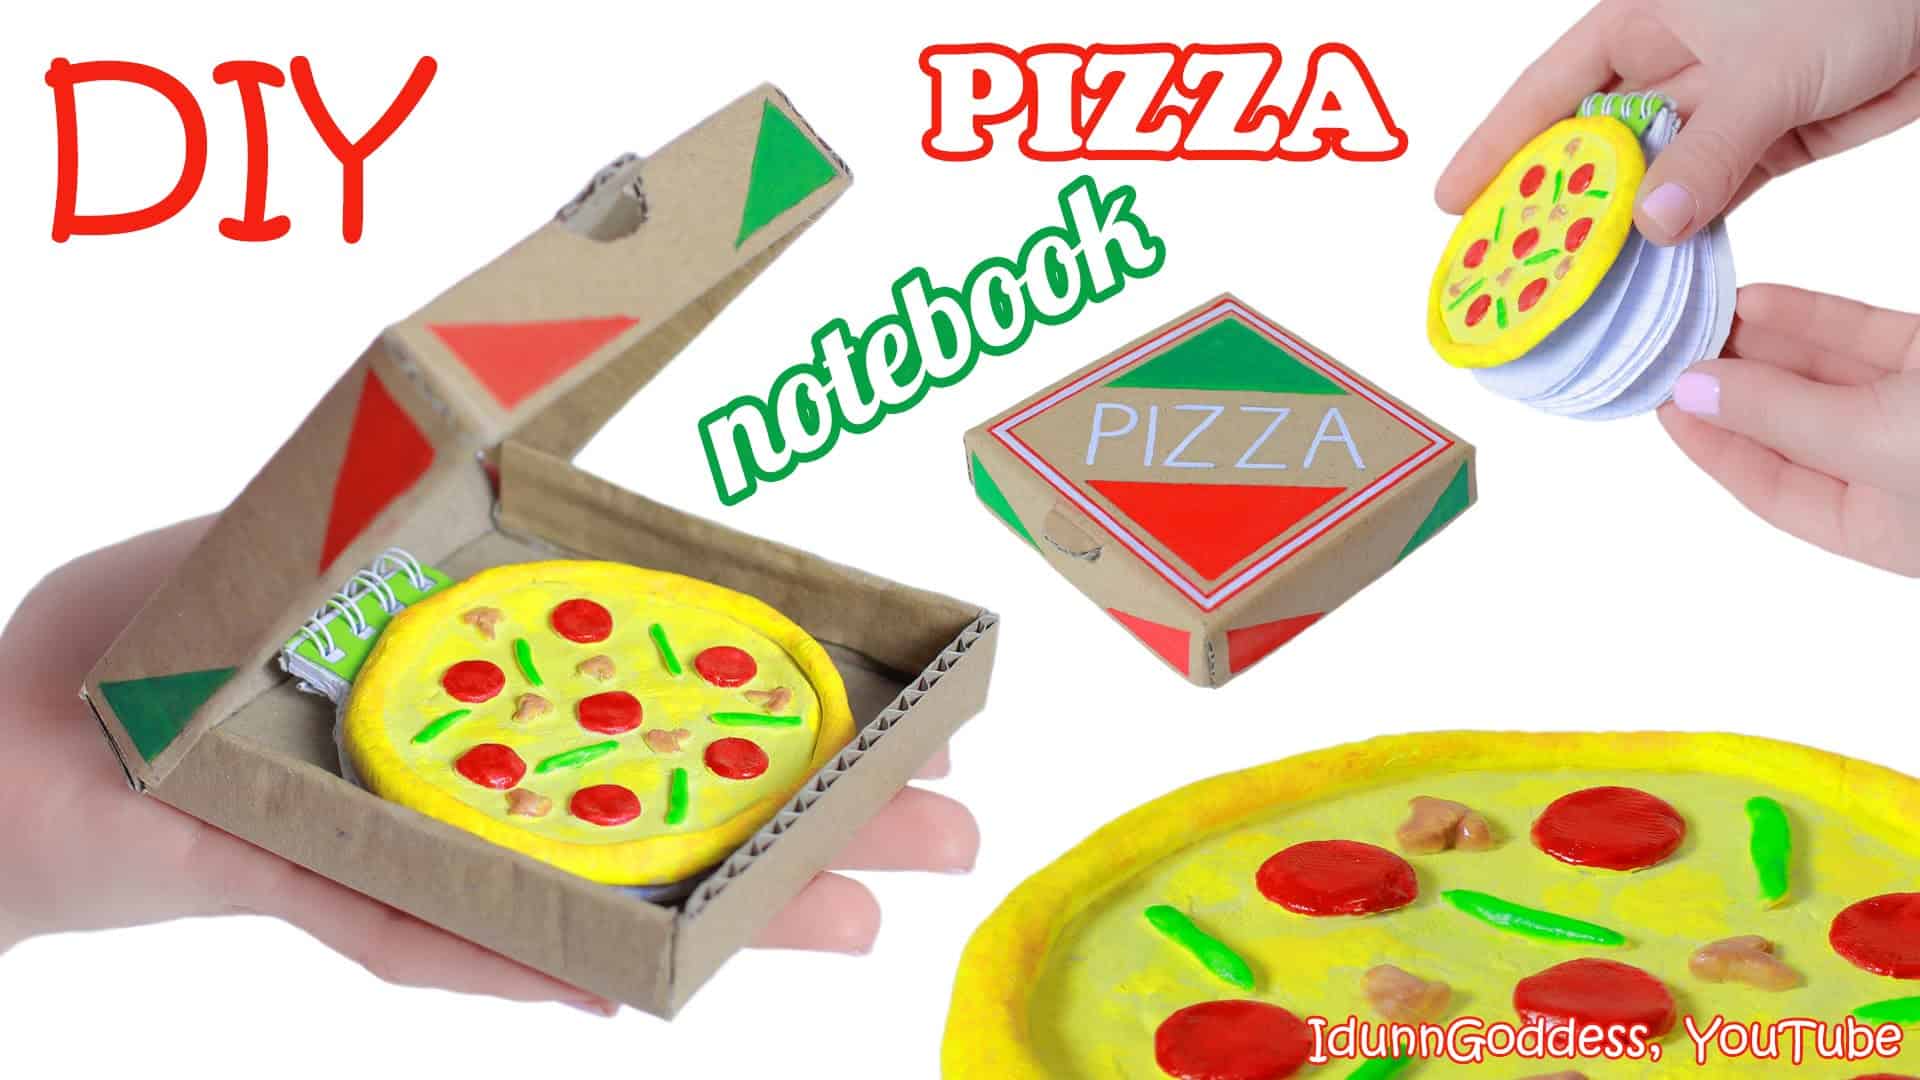 Pizza notebook